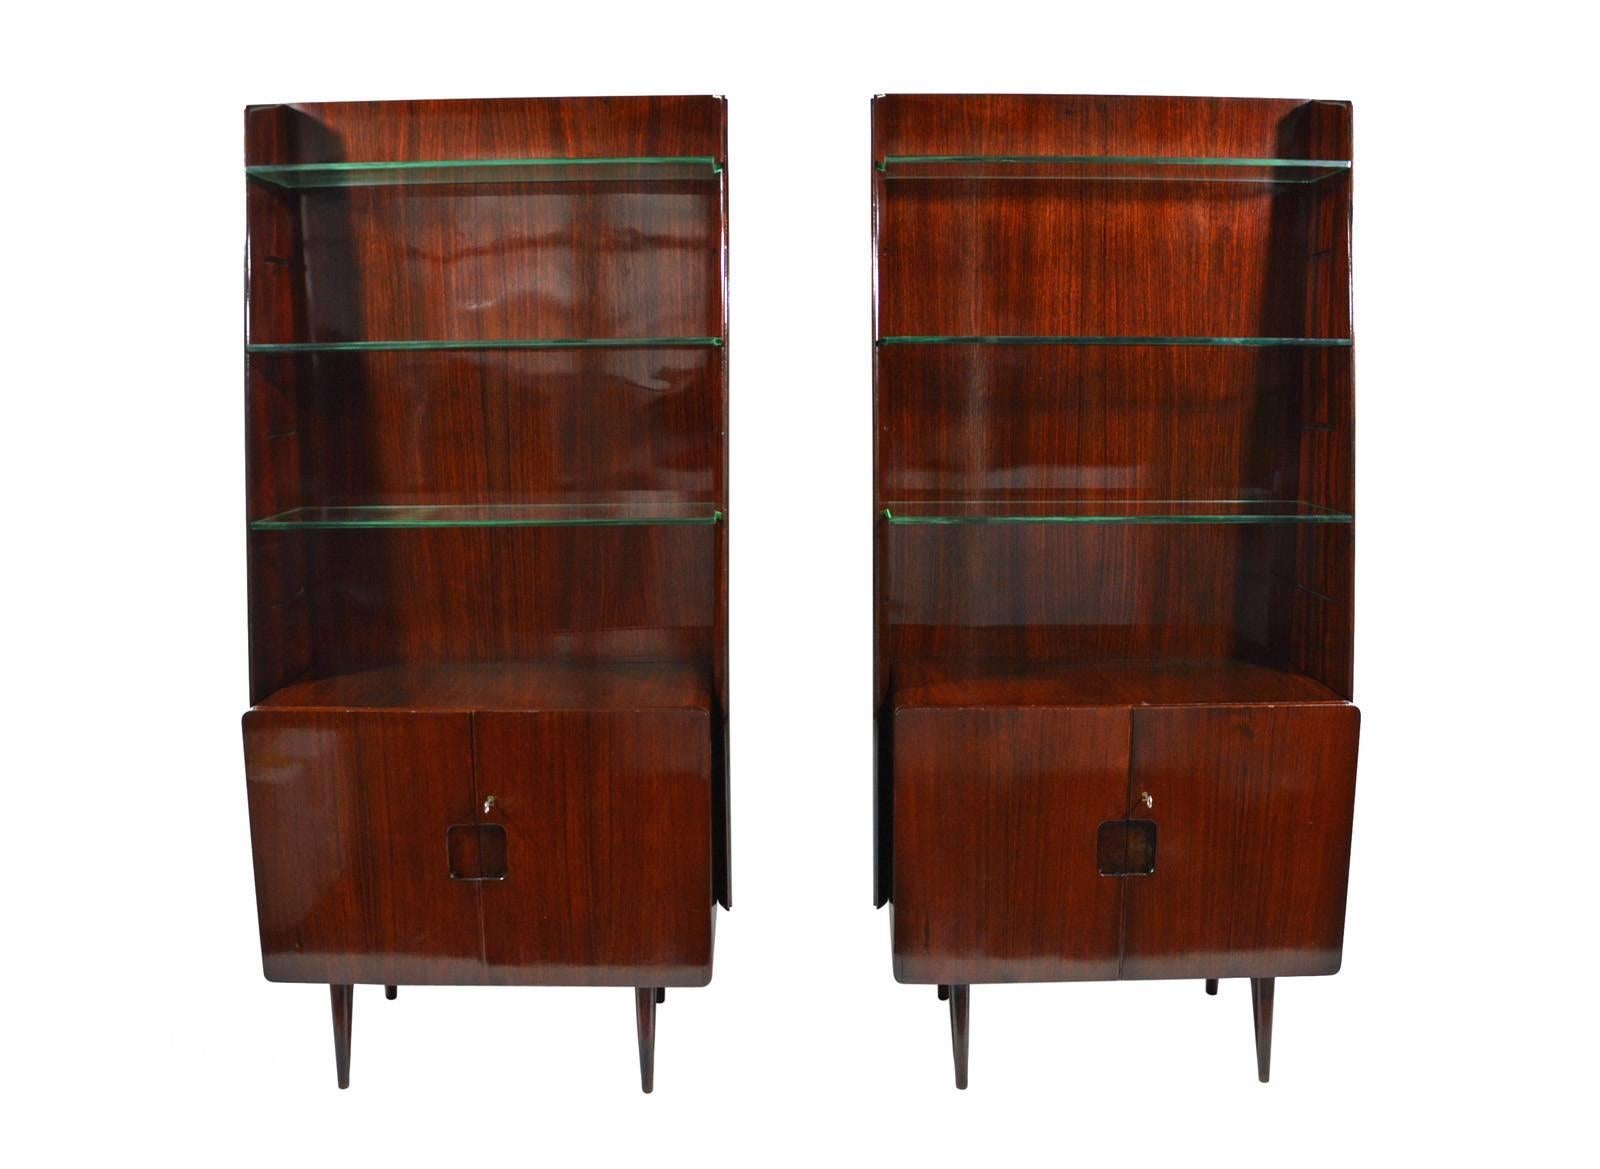 A pair of mahogany bookcases with glass shelves designed in 1950s by Franco Cavatorta for his family's firm, Silvio Cavatorta, based in Rome.
In good original condition, with some signs of age visible in the photos, marked with metal